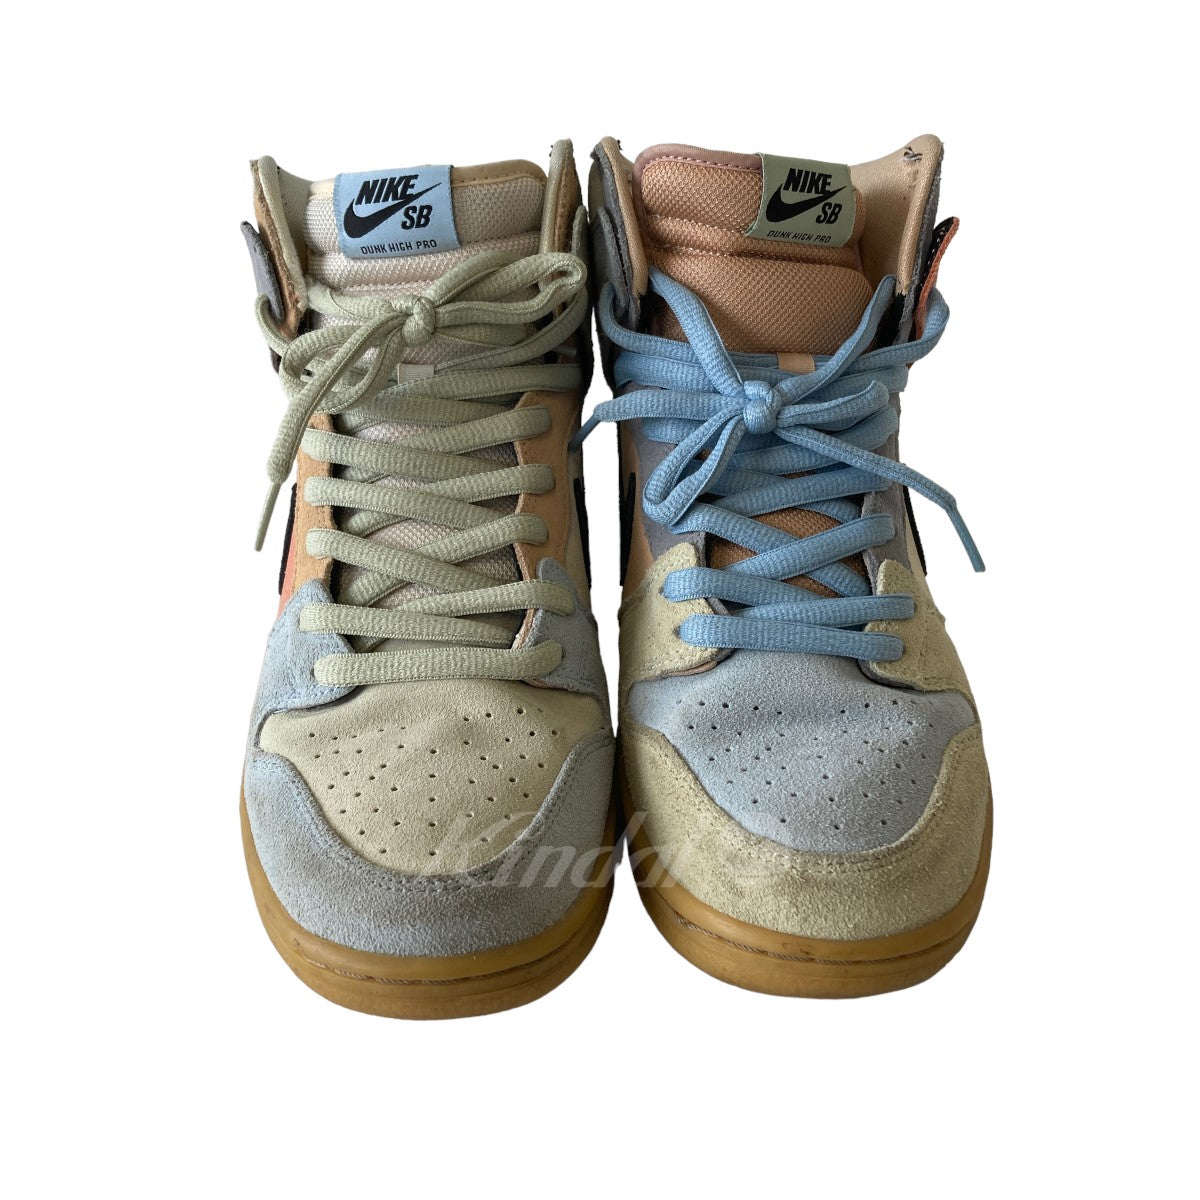 NIKE(ナイキ) SB DUNK HIGH PRO EASTER PARTICLE CN8345-001 マルチ ...